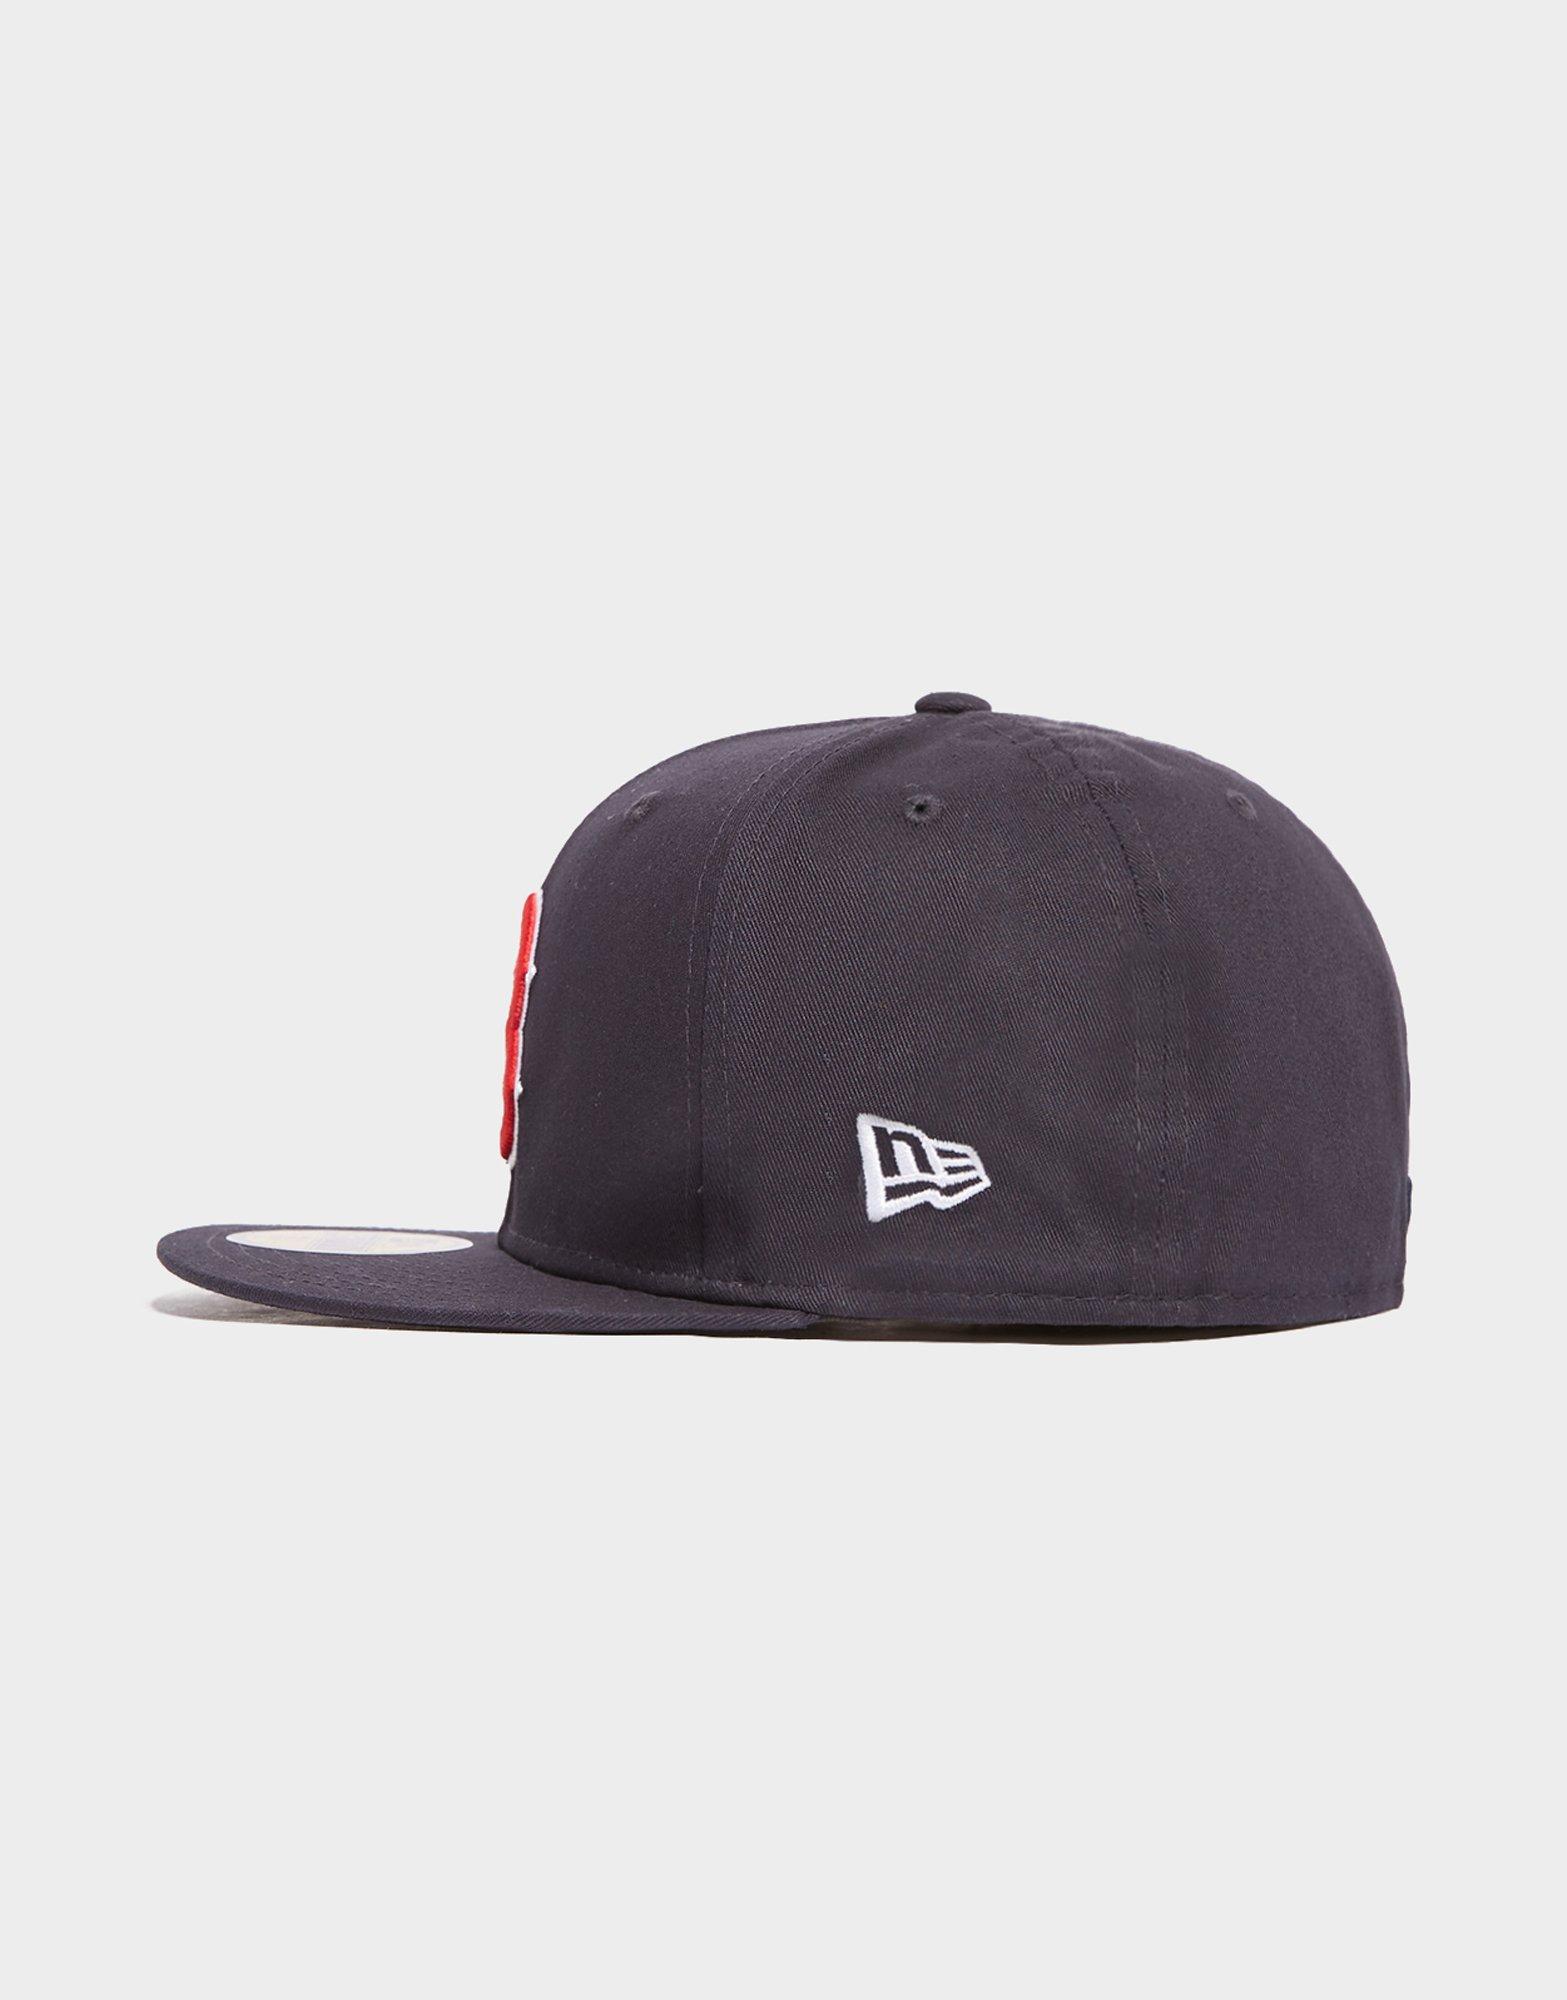  New Era Mens Team Classic 3930 Detroit Tigers Home Navy Hat  SM/MD - S/M : Sports & Outdoors